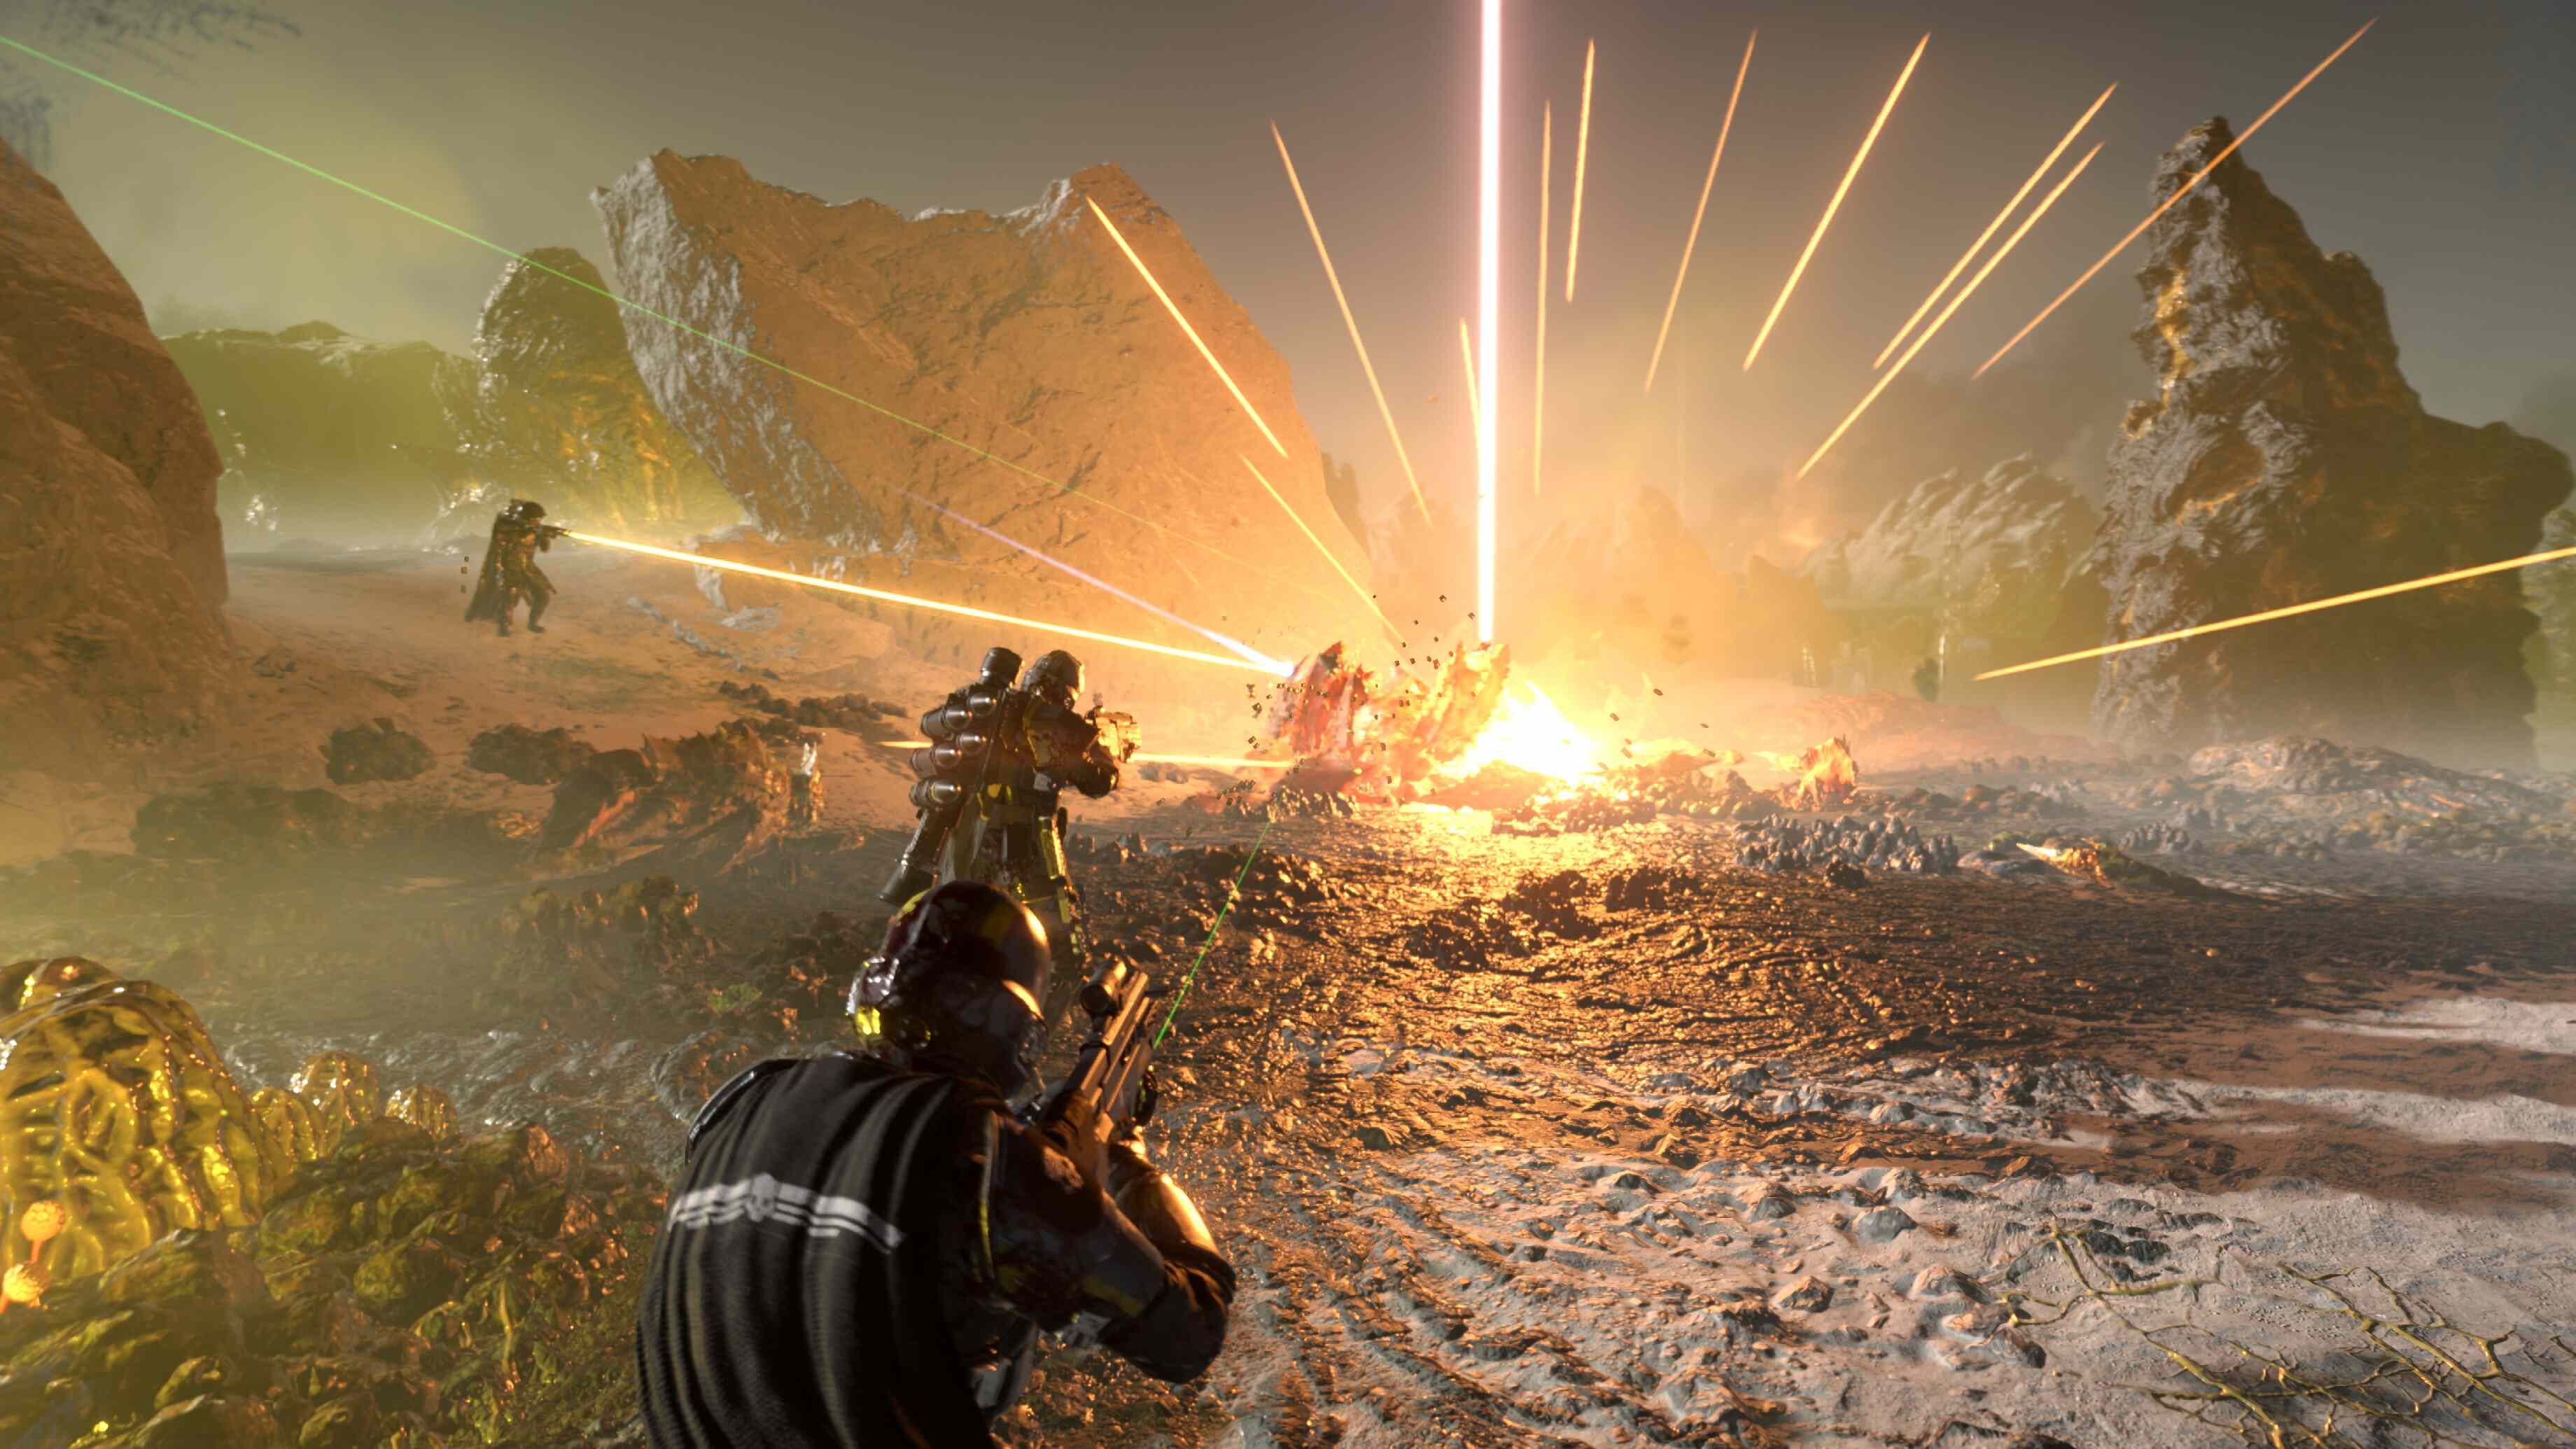 Helldivers 2 pits you against bots, bugs, and the planet itself. || Image Source: Sony/Arrowhead Studios.